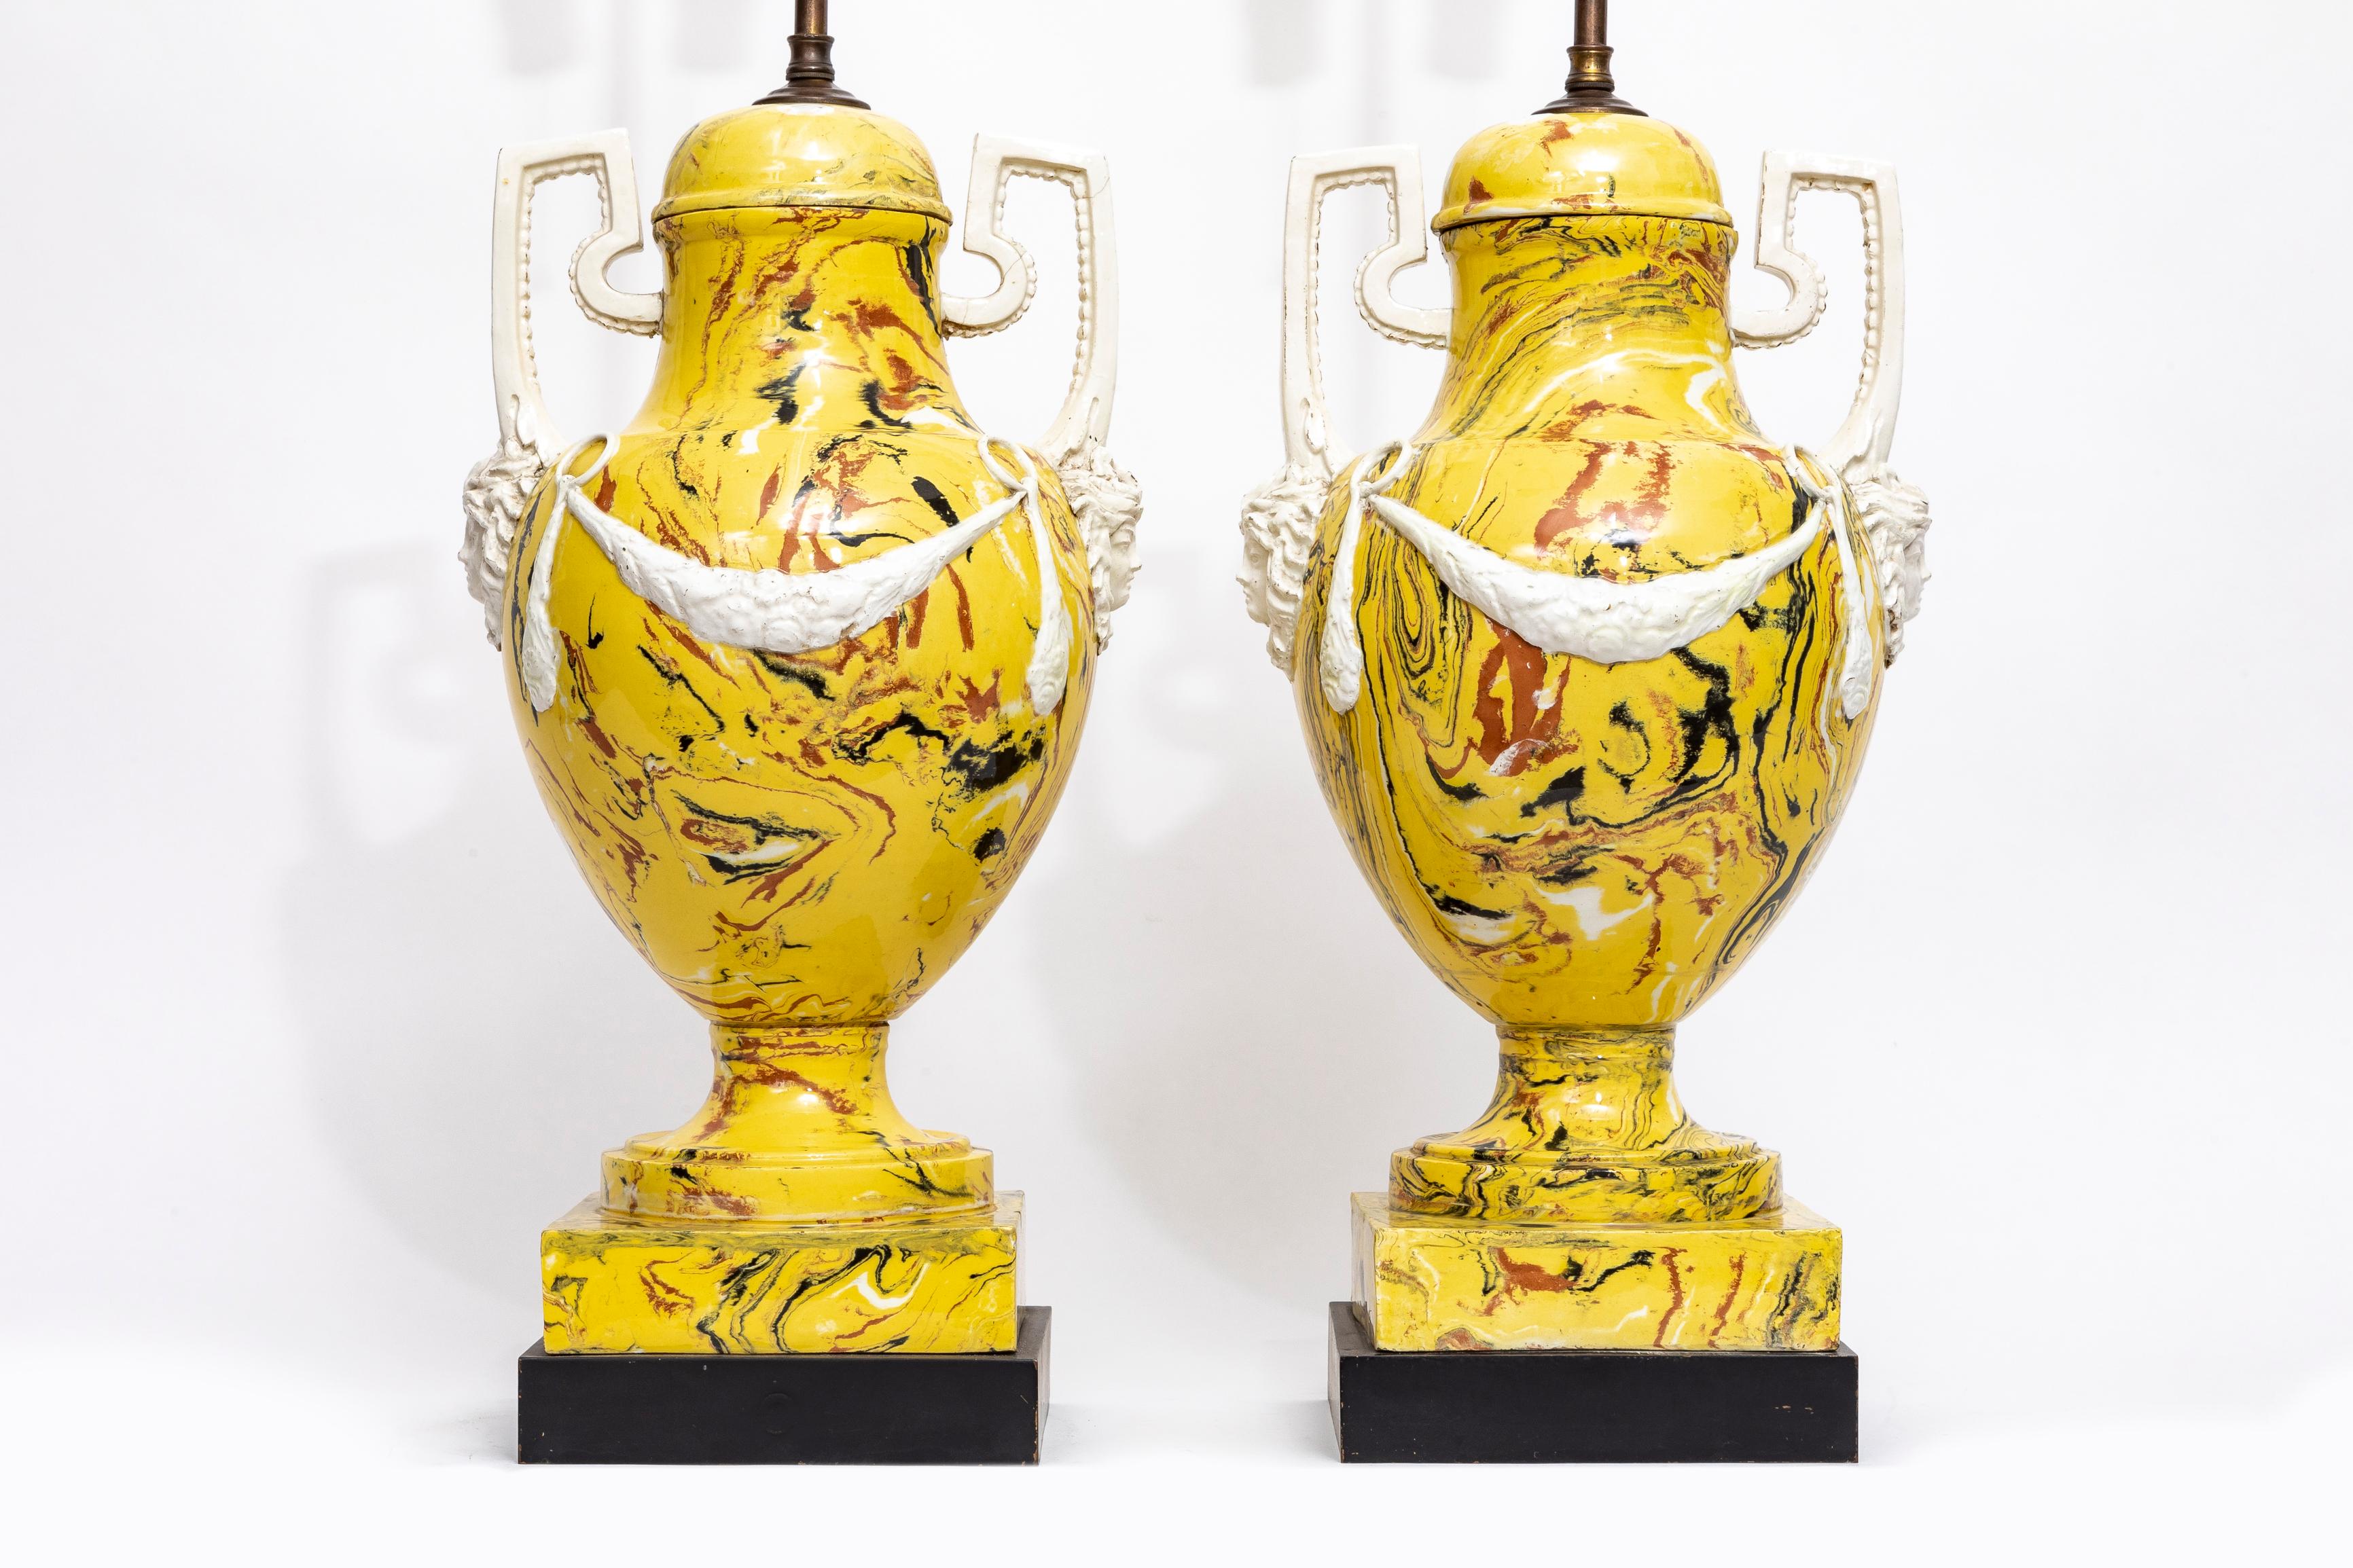 Pair of Italian Agateware Porcelain Lamps with Medusa Masks, Wreaths, & Handles In Good Condition For Sale In New York, NY